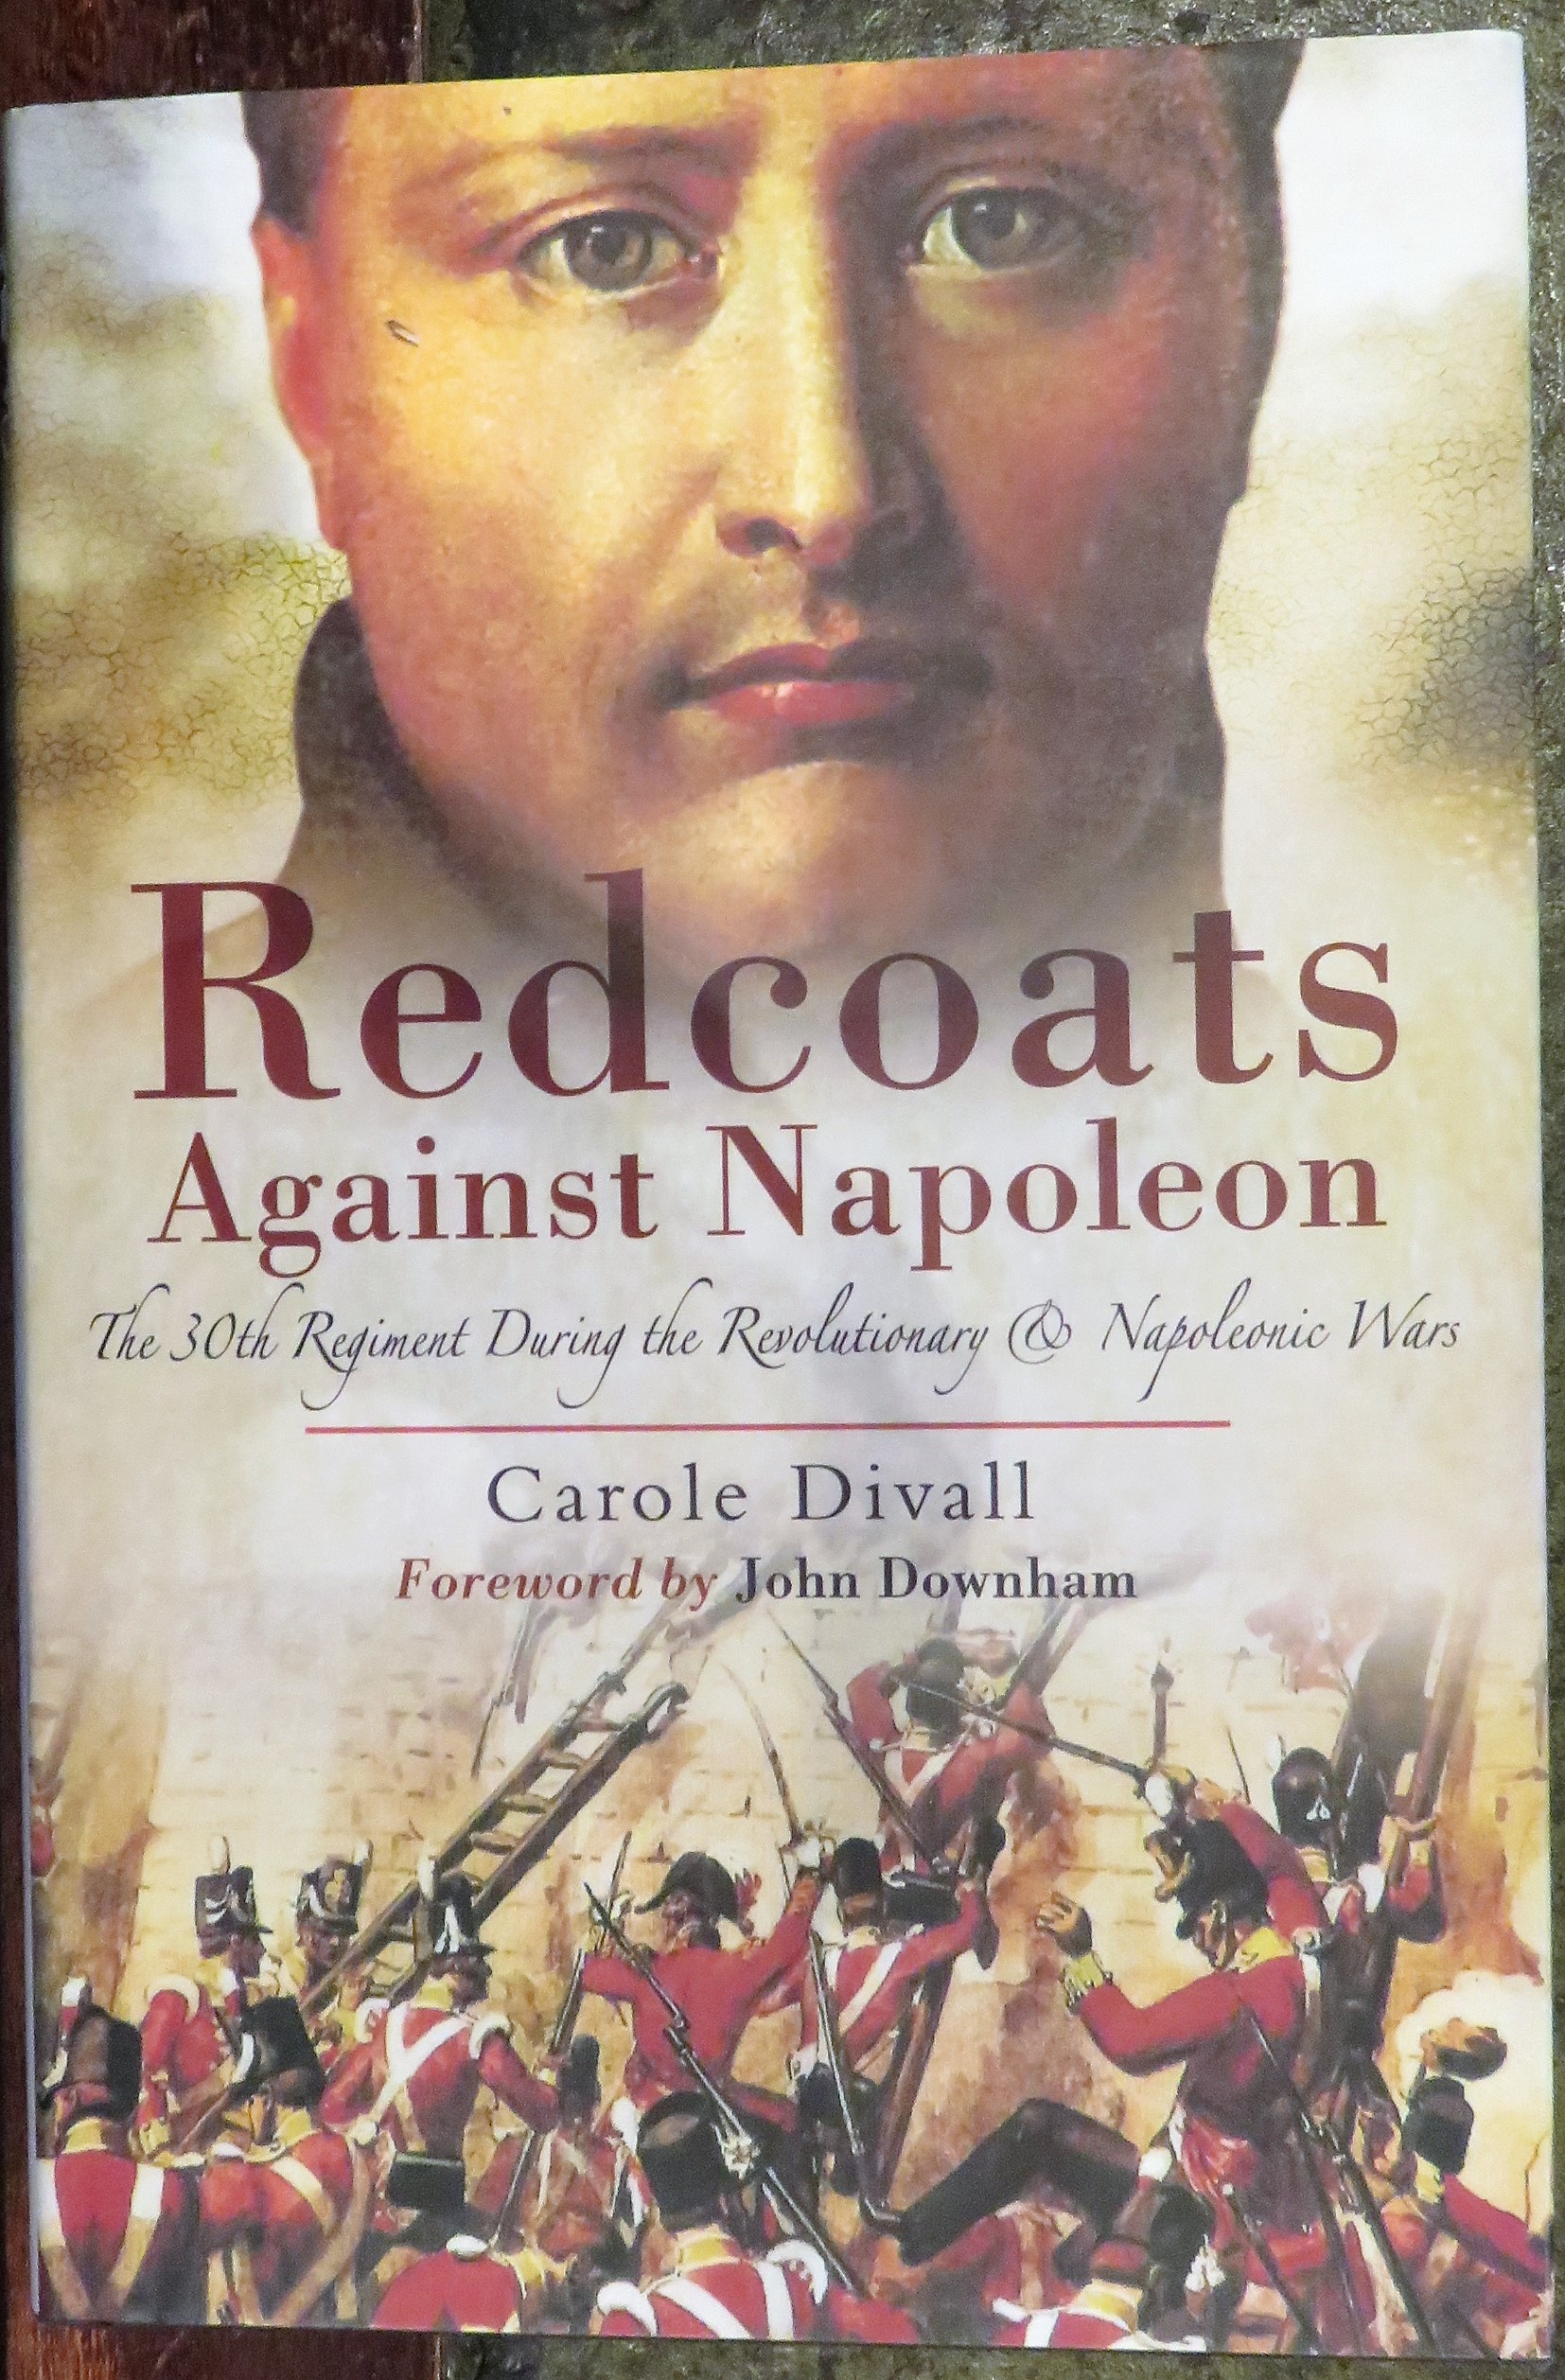 SIGNED Redcoats Against Napoleon The 20th Regiment During the Revolutionary and Napoleonic Wars